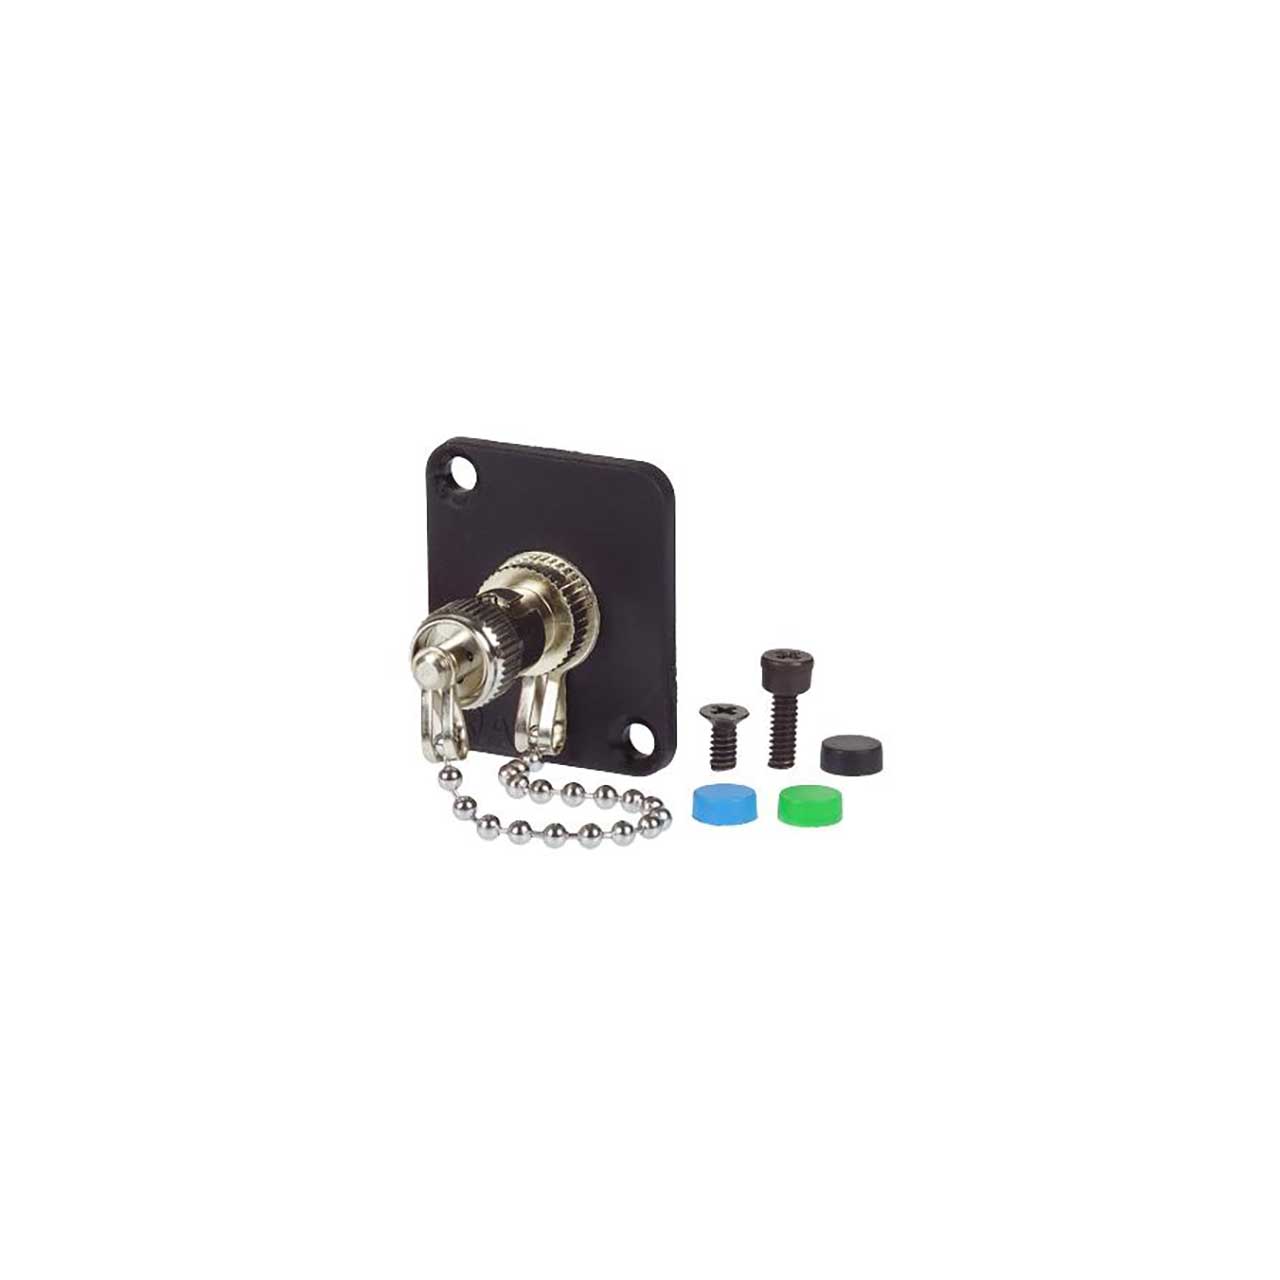 AVP UMF-SMS-ST-DC ST SM SX Metal Adaptor - Zirconia Sleeve with 1 Dust Cap and Chain AVP-UMF-SMS-STDC